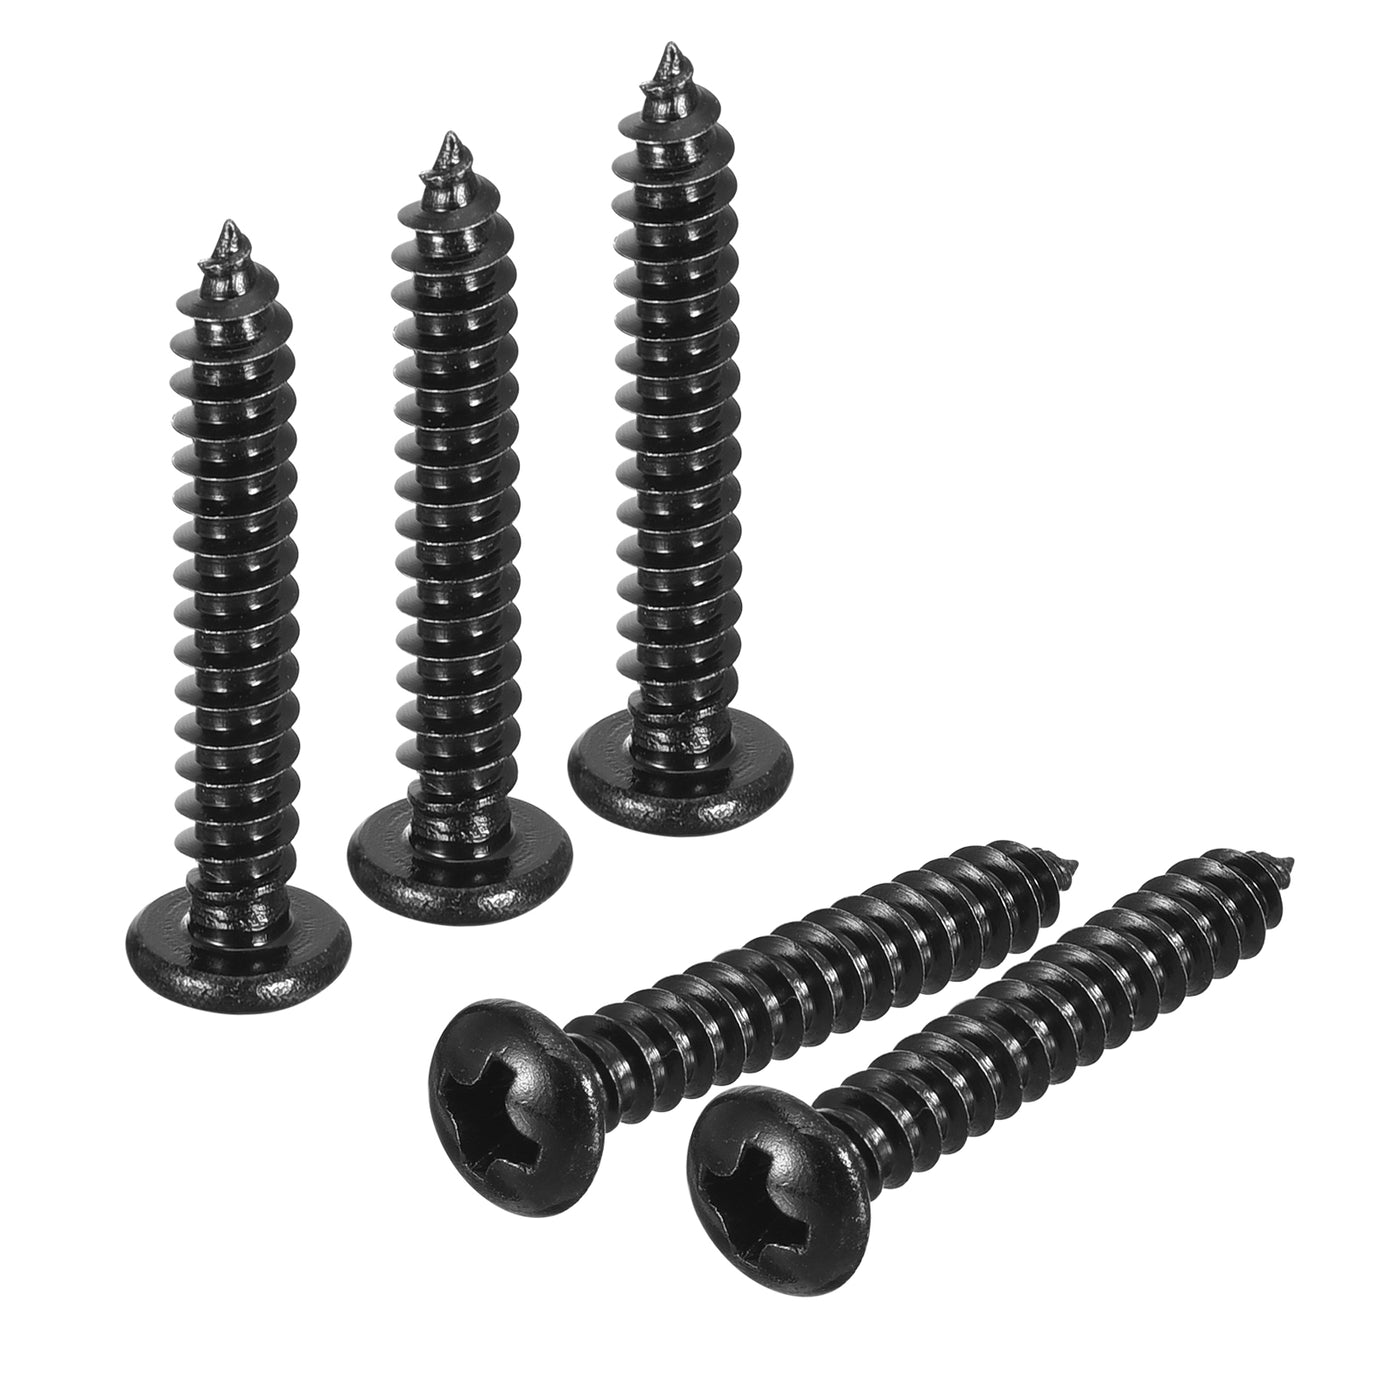 uxcell Uxcell #8 x 1" Phillips Pan Head Self-tapping Screw, 100pcs - 304 Stainless Steel Round Head Wood Screw Full Thread (Black)